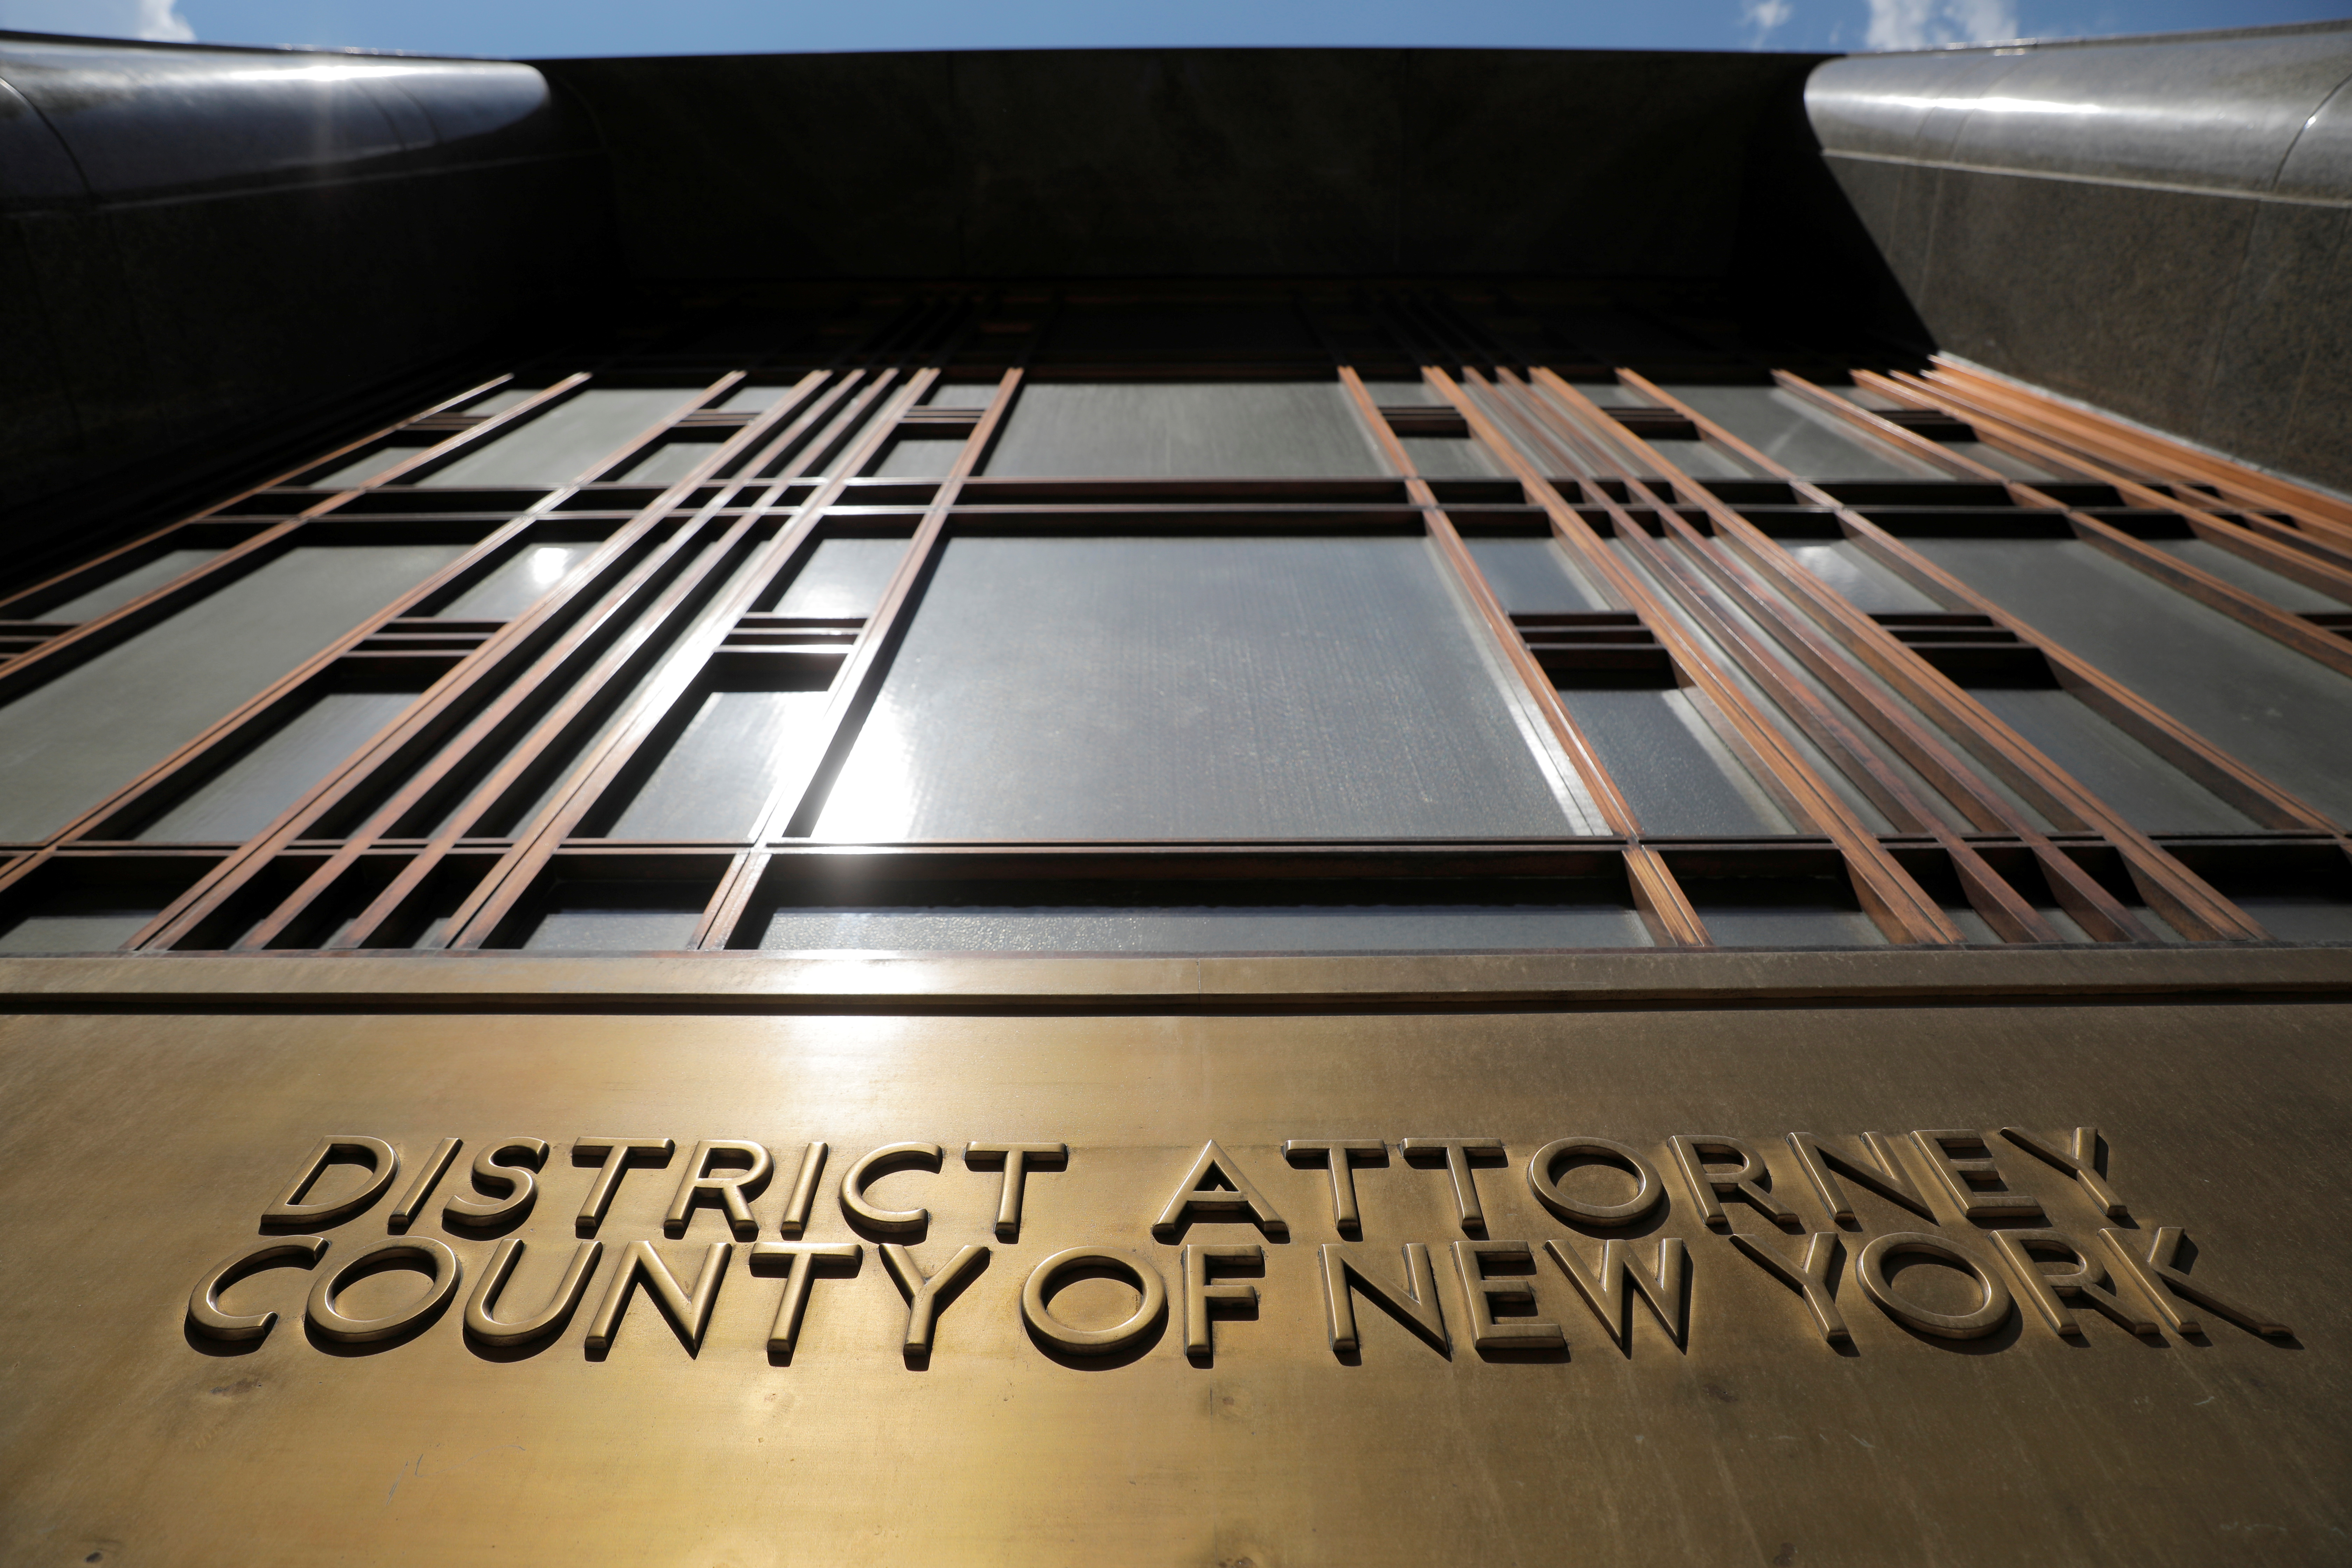 The entrance to the The New York County District Attorney's office at 1 Hogan Place is seen in Manhattan in New York City, New York, U.S. REUTERS/Andrew Kelly